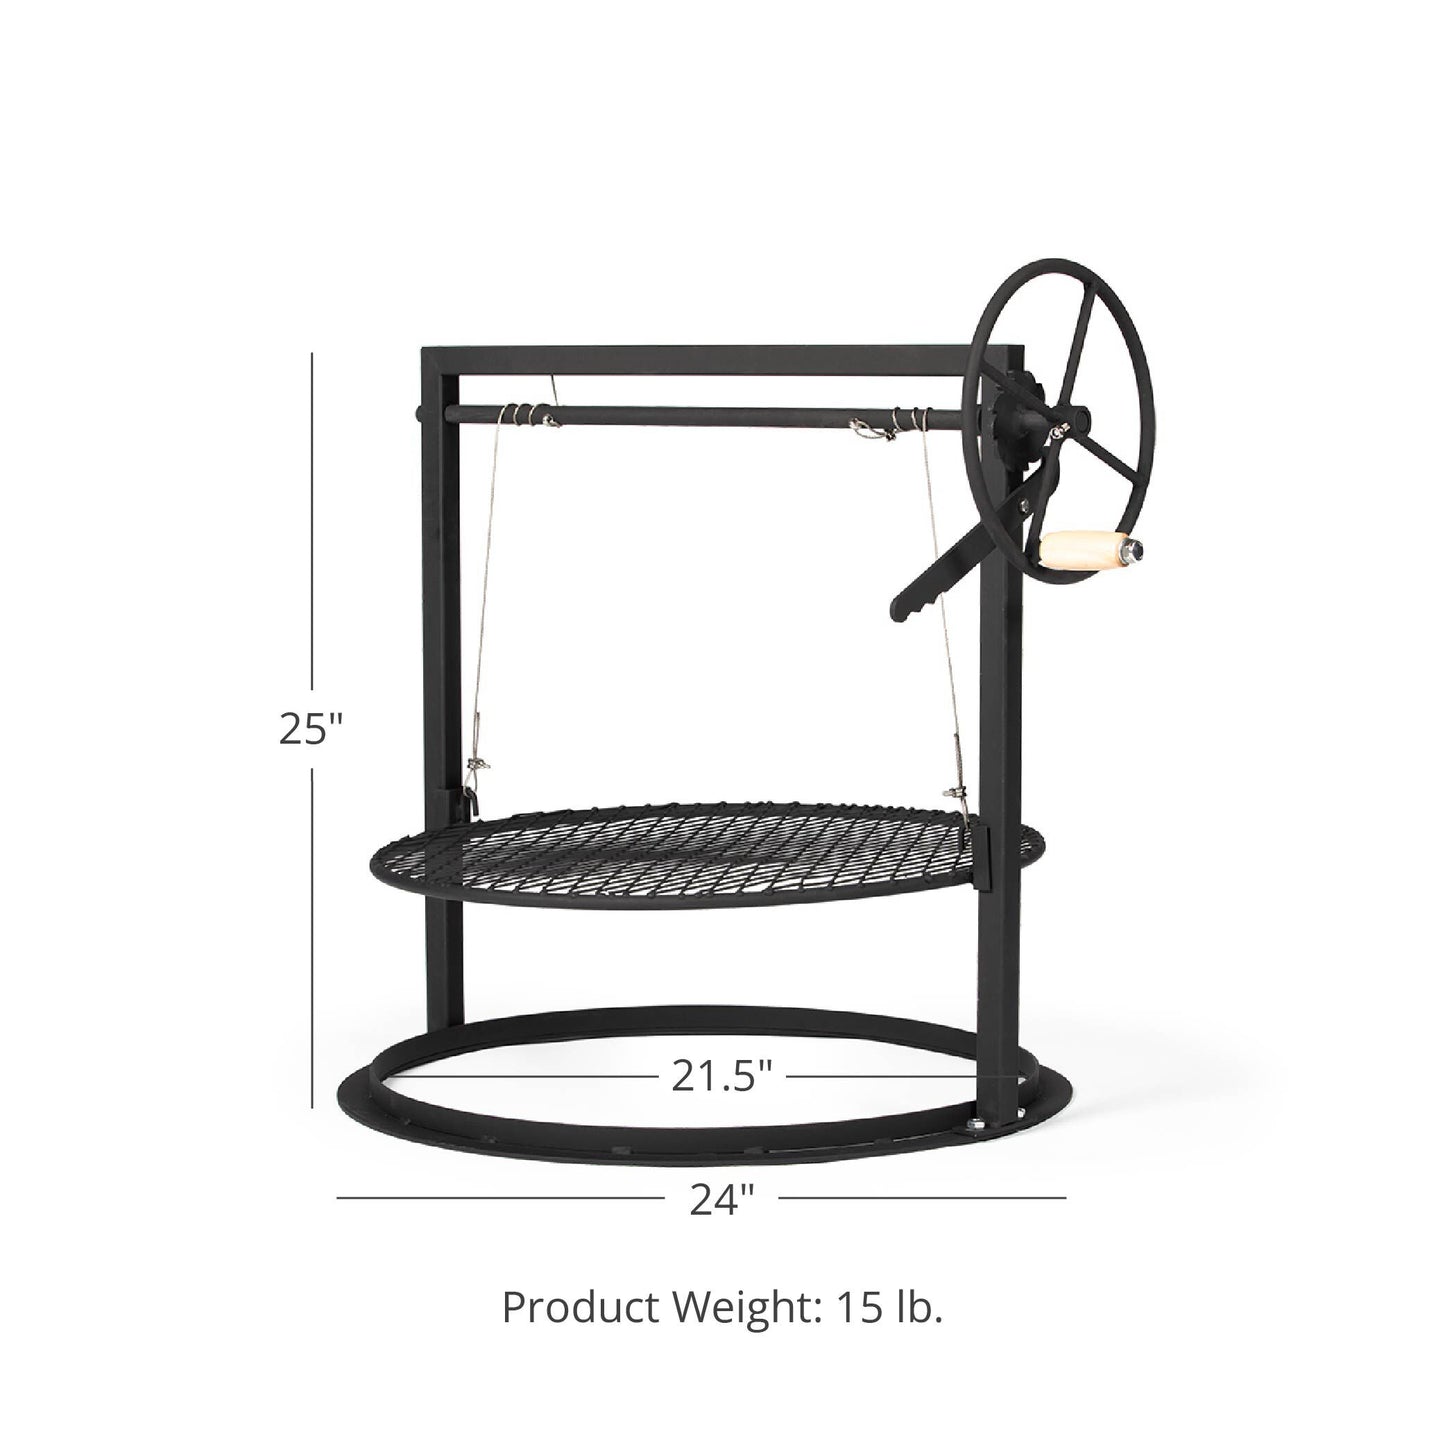 Adjustable Kettle-Style Grill Attachment - view 9